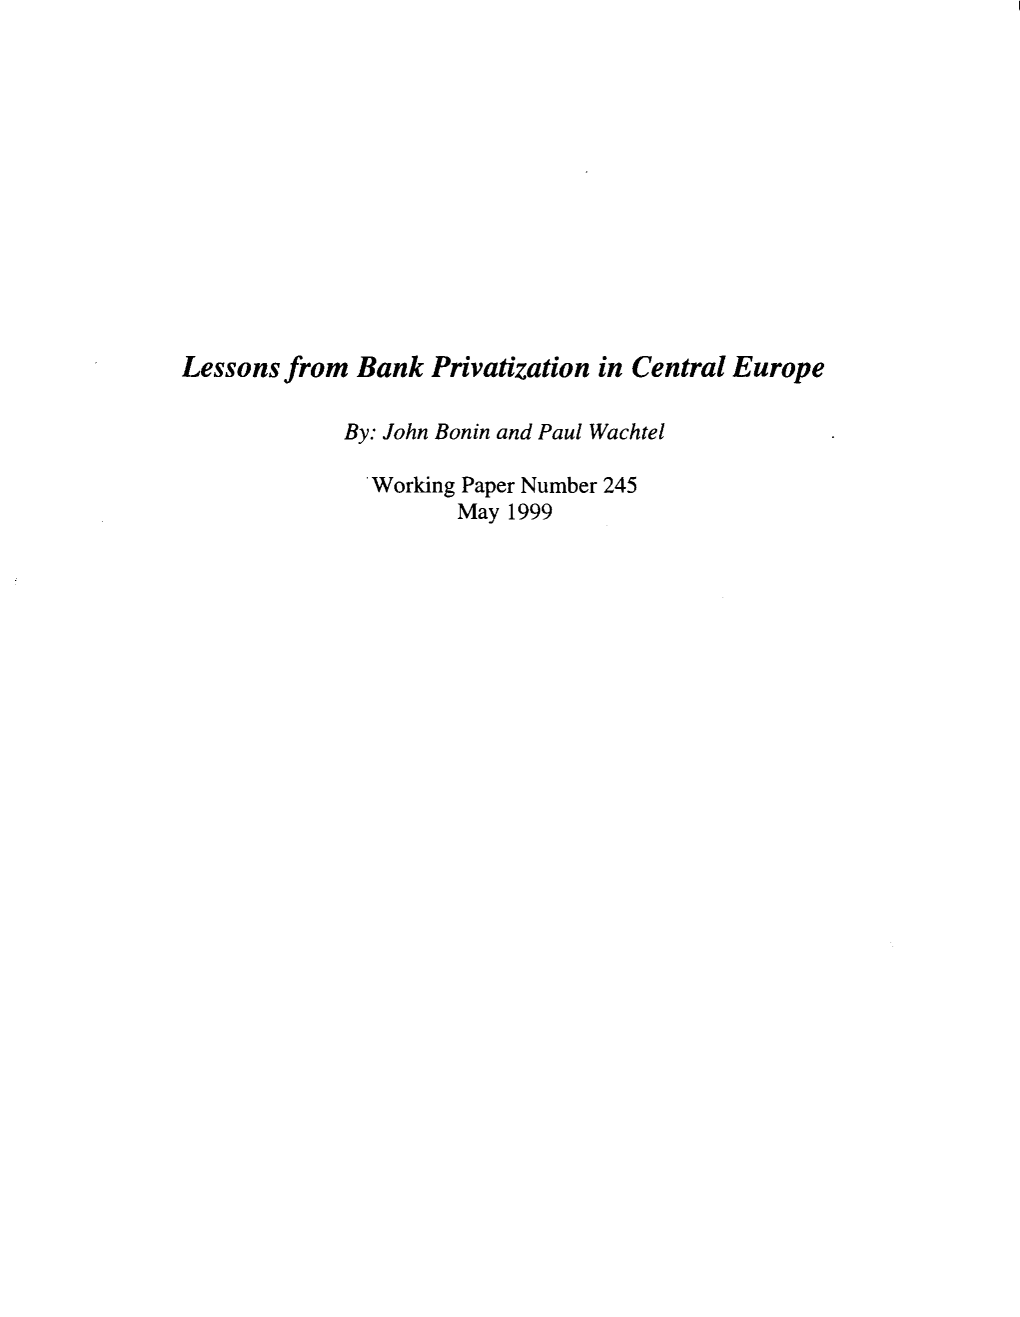 Lessons from Bank Privatization in Central Europe